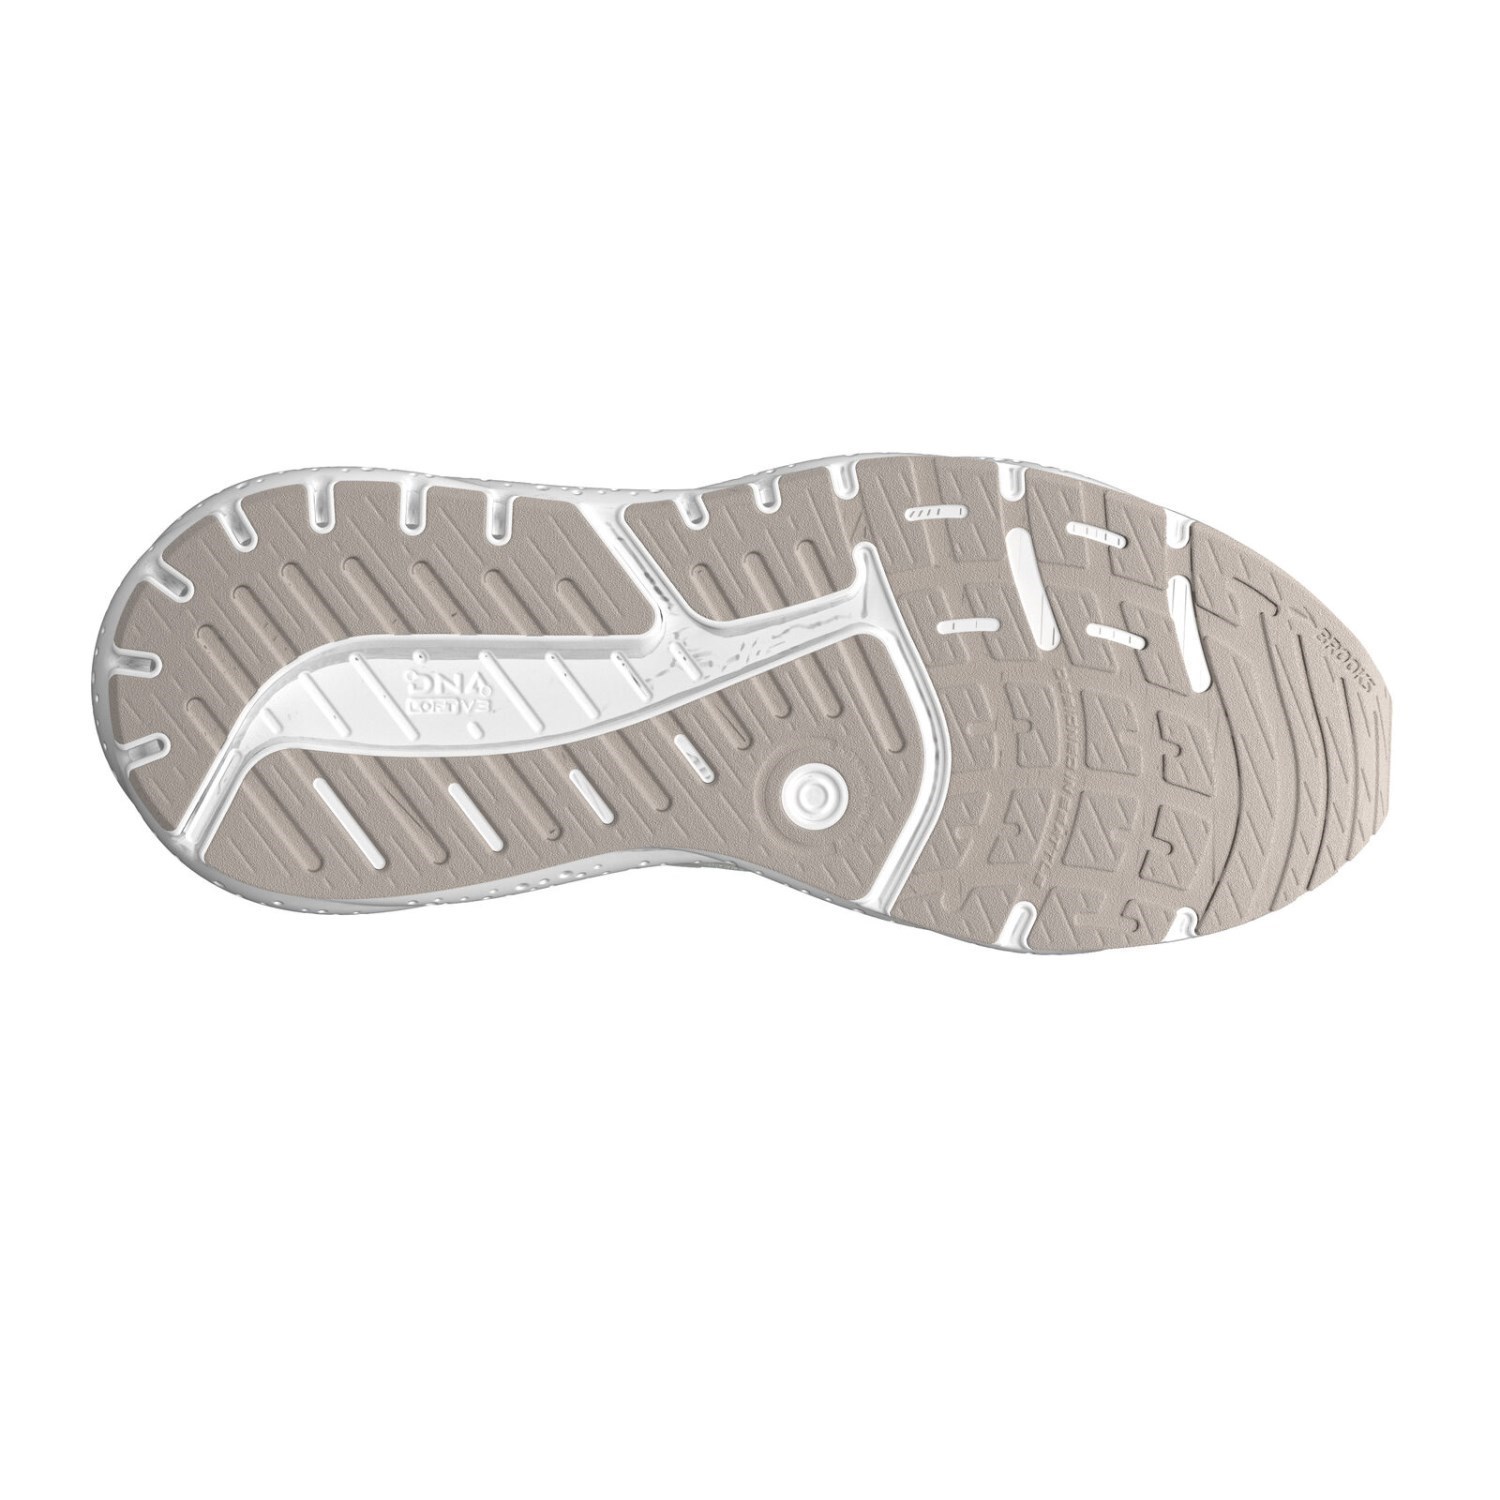 Brooks Ariel GTS 23 - Womens Running Shoes - Chateau Grey/White/Sand ...